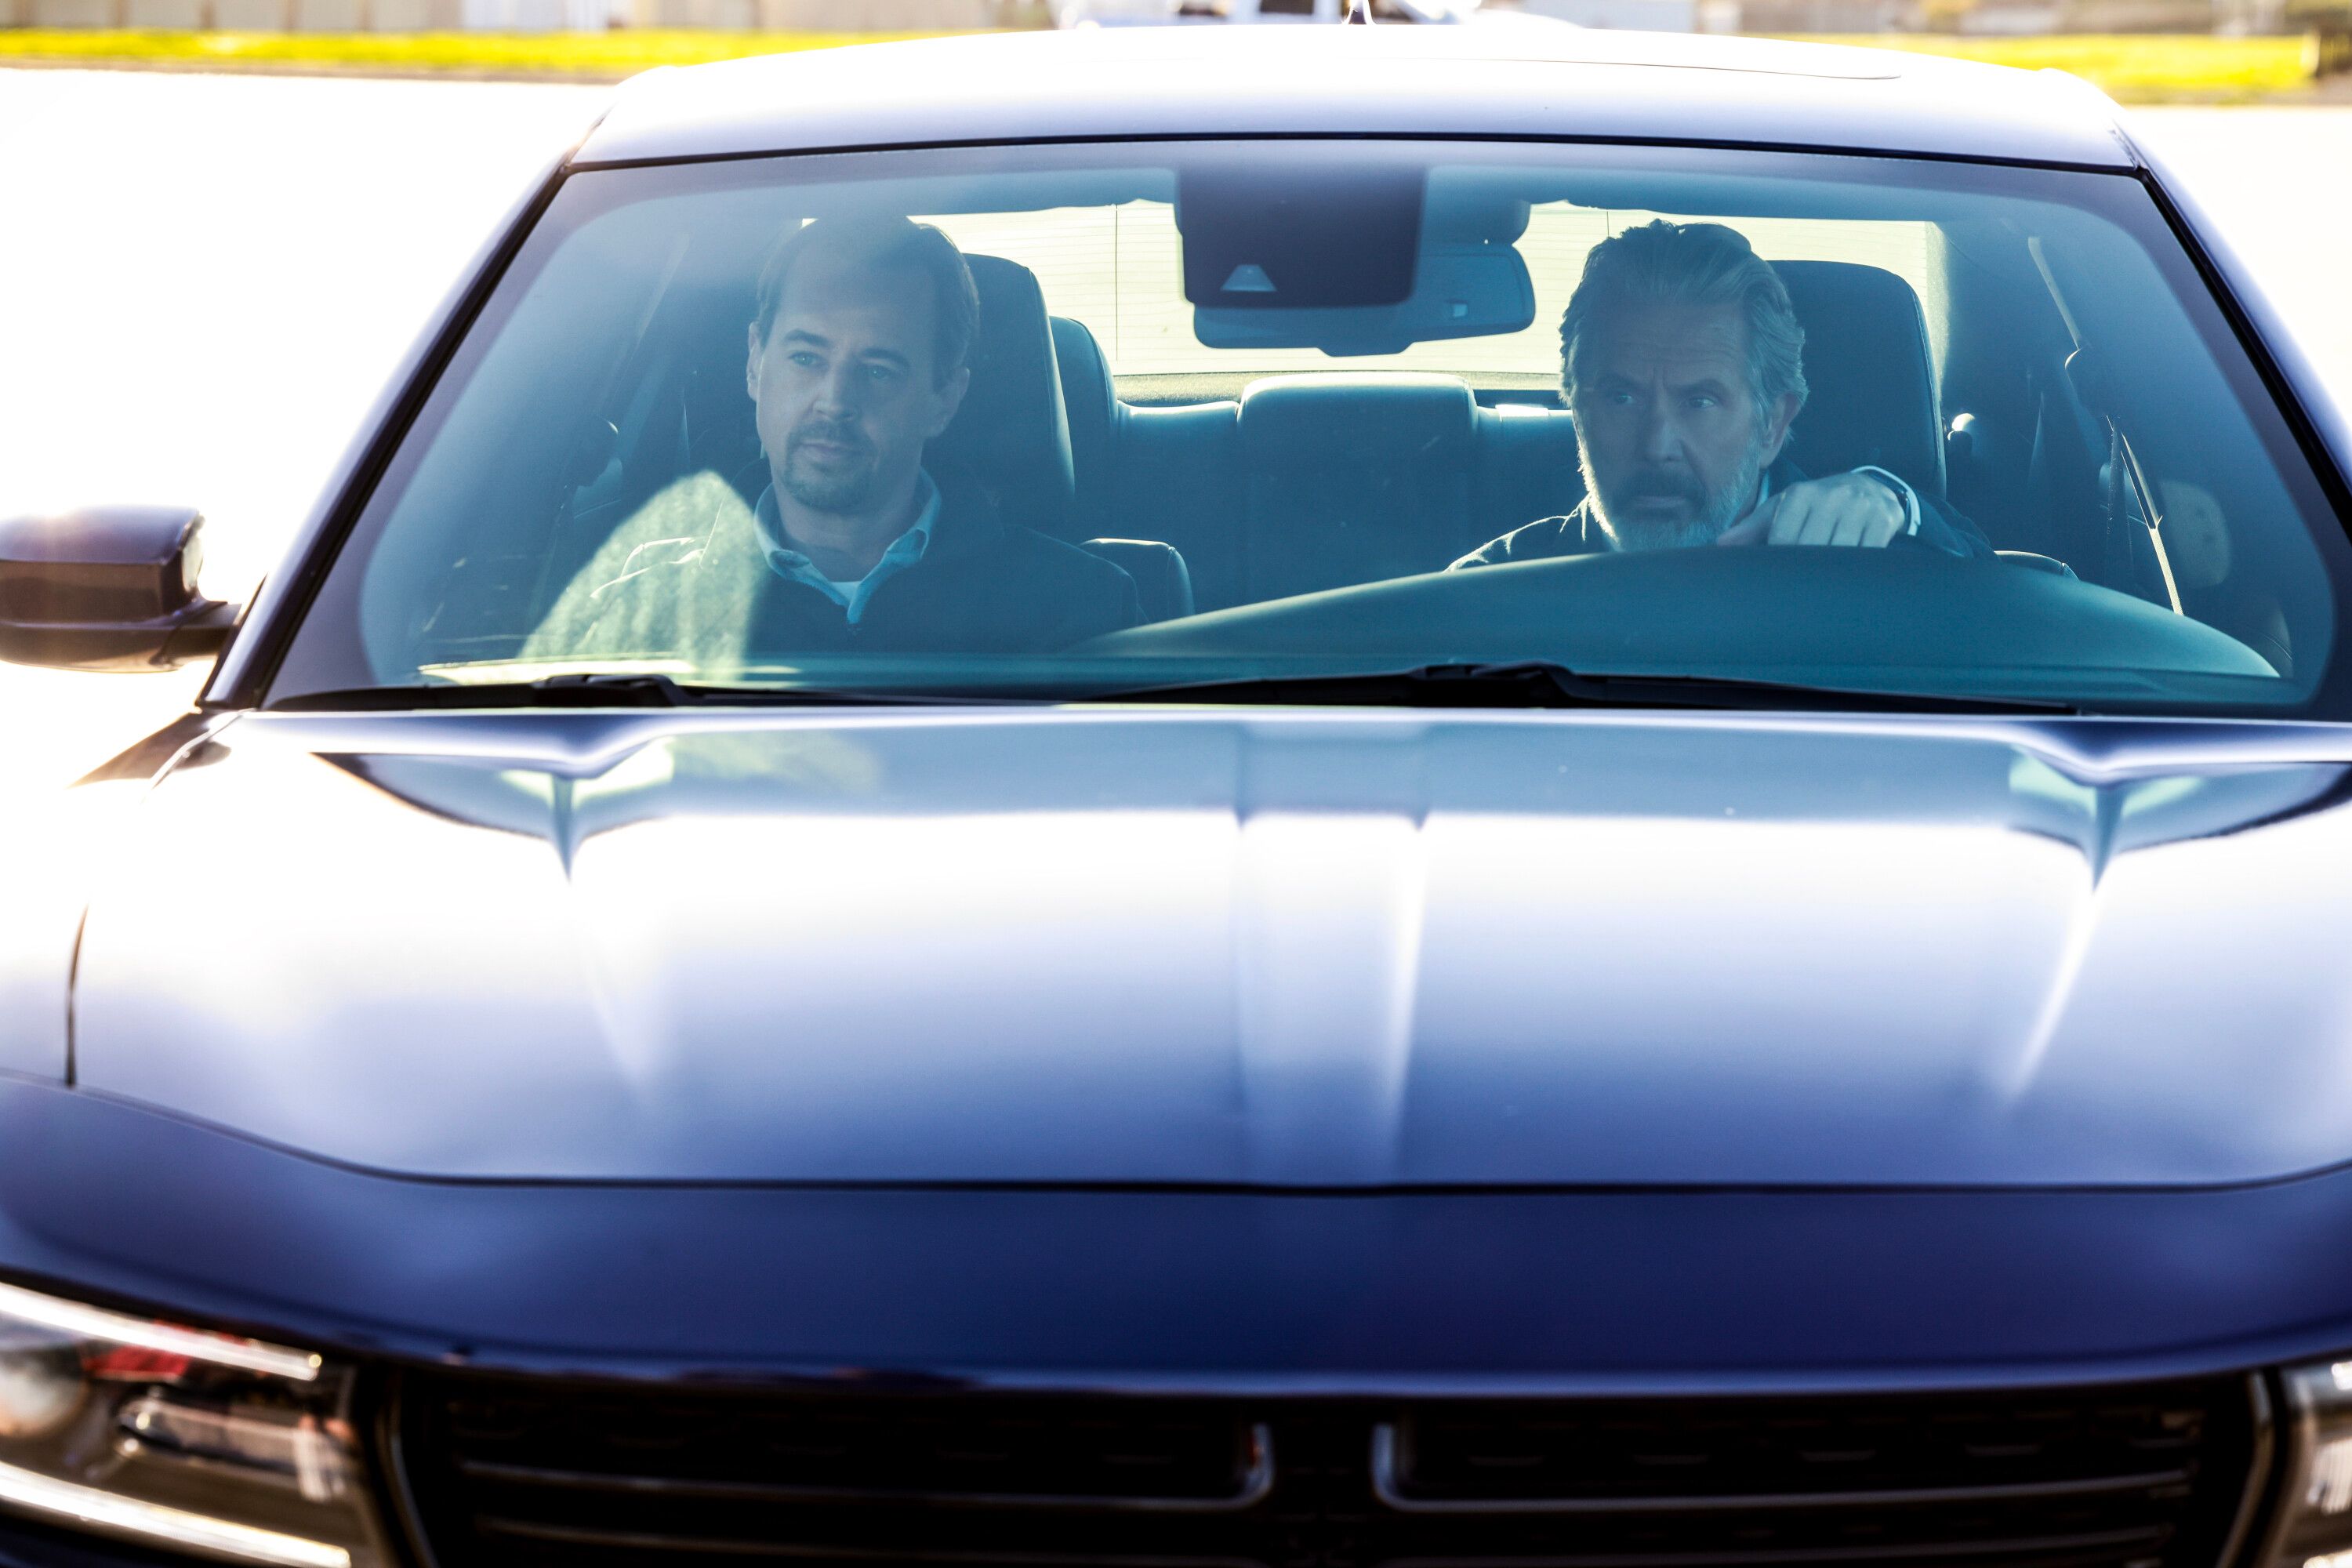 NCIS Season 21 Episode 7 - McGee and Parker in car